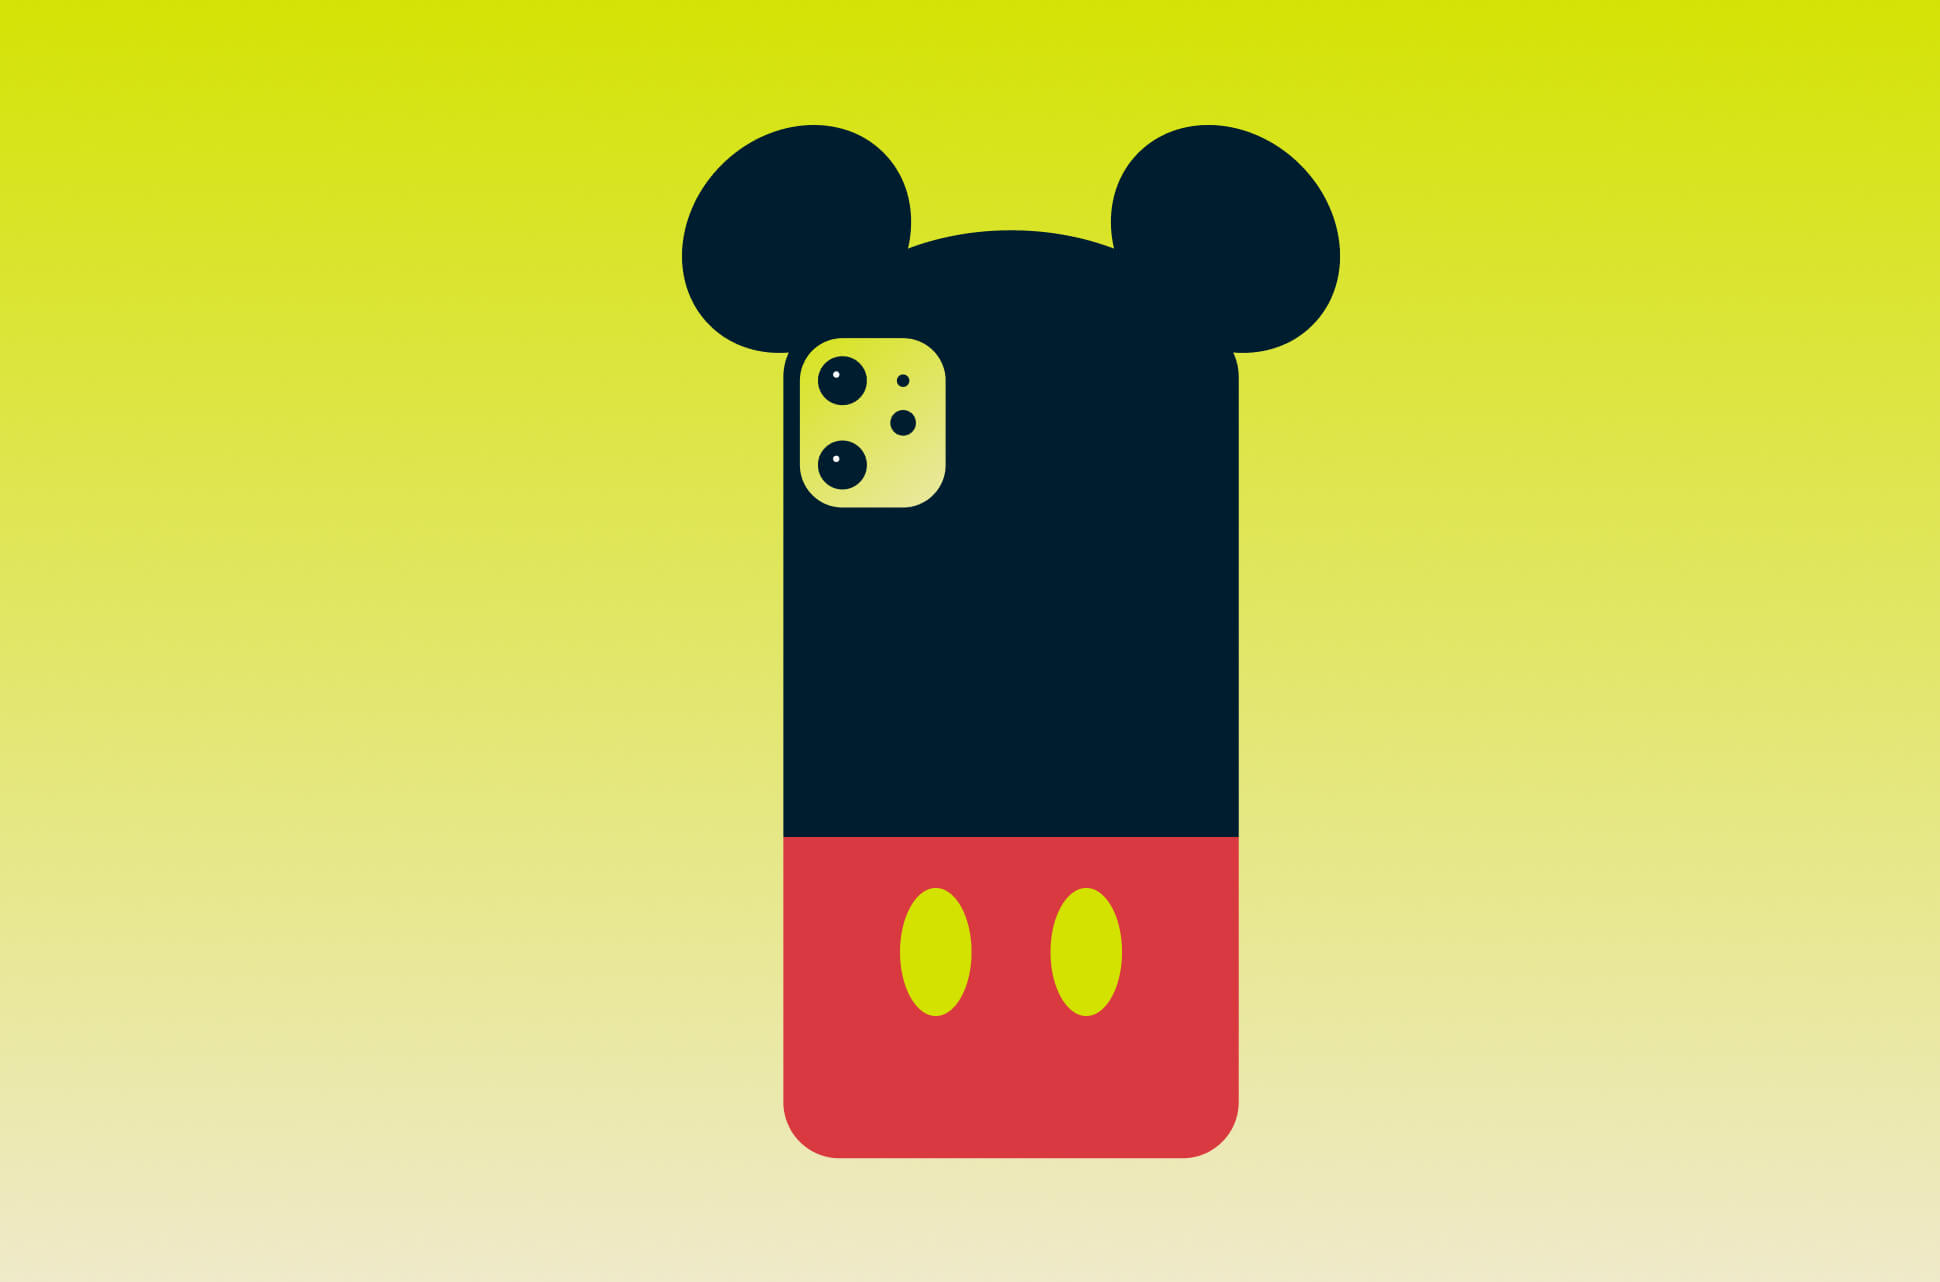 Mouse Accuracy Test - APK Download for Android